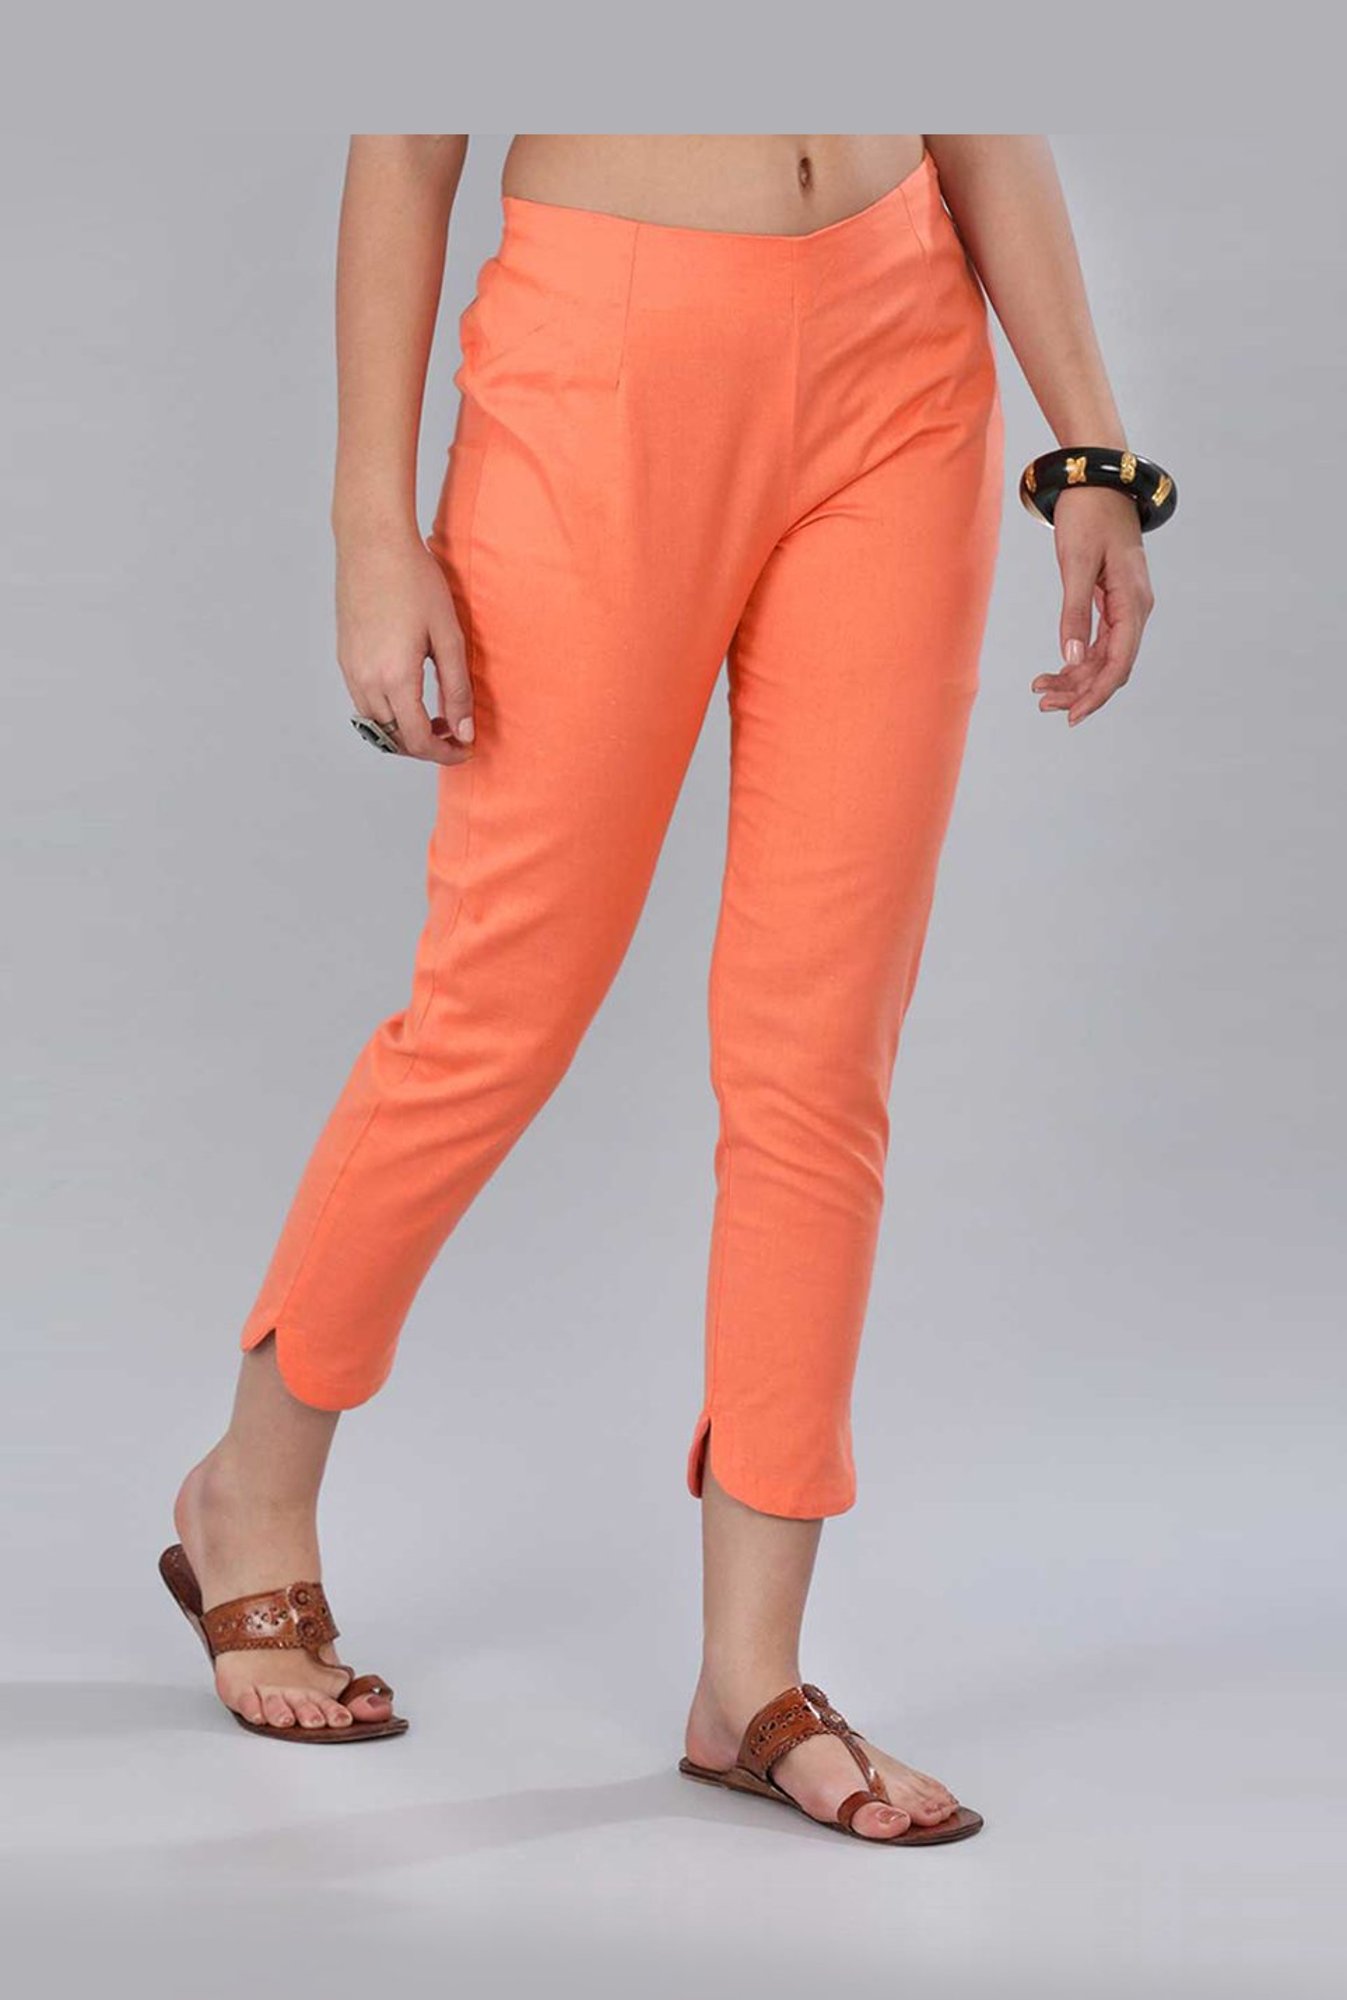 Buy Pranjal Women Orange Rayon Lycra Straight Casual Cigarette Pants XL  Online at Best Prices in India  JioMart